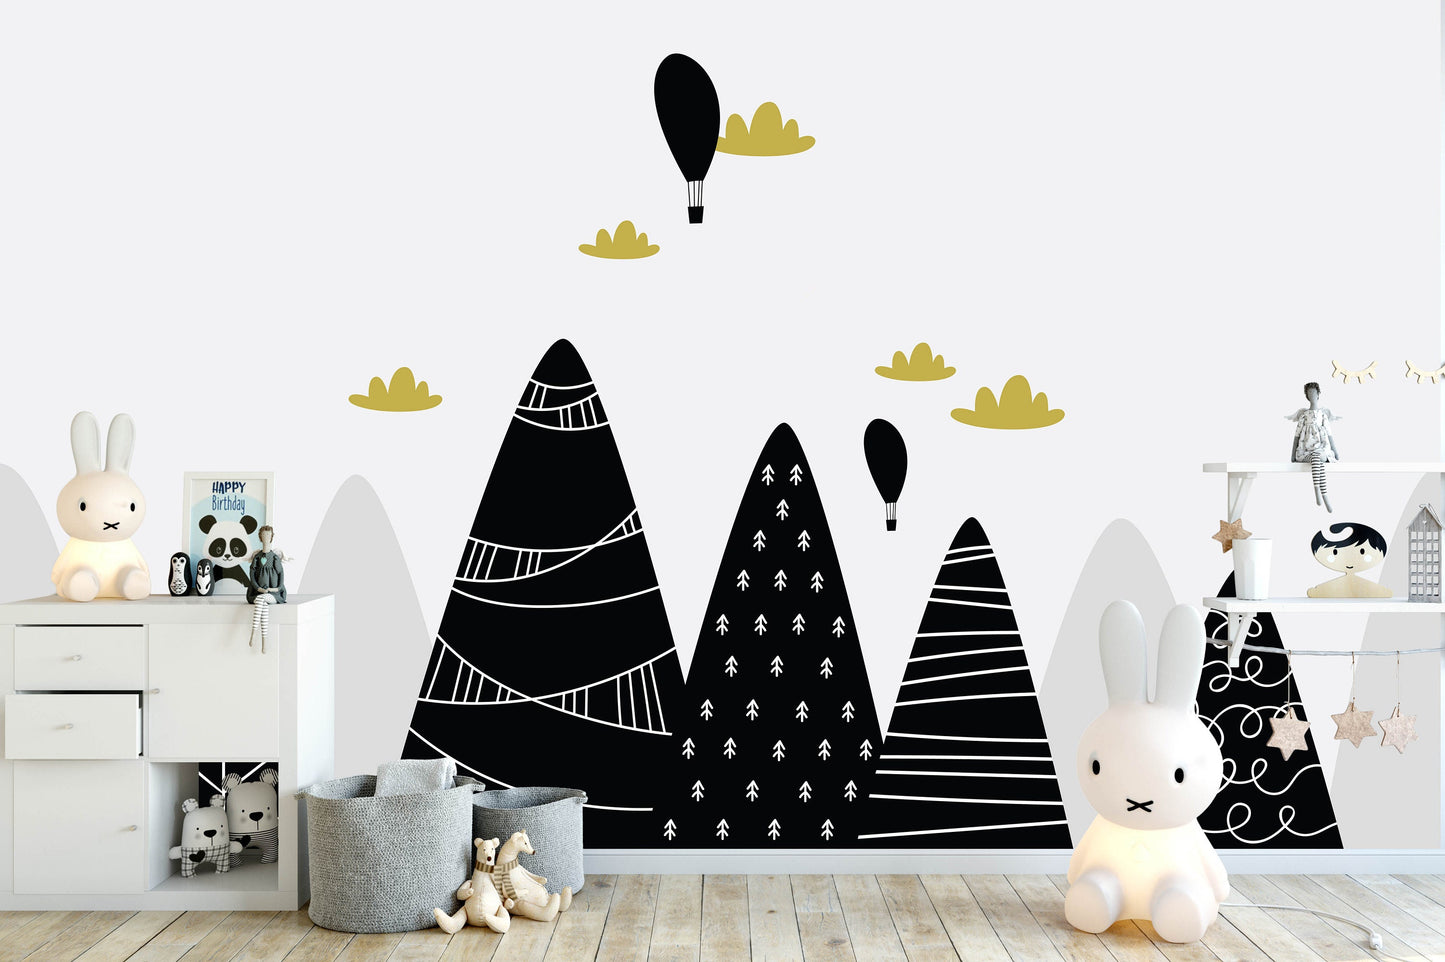 Removable Peel and Stick Wallpaper Black Mountains Air Hot balloon Sky Nursery Wall Paper Wall Murals, KL0049